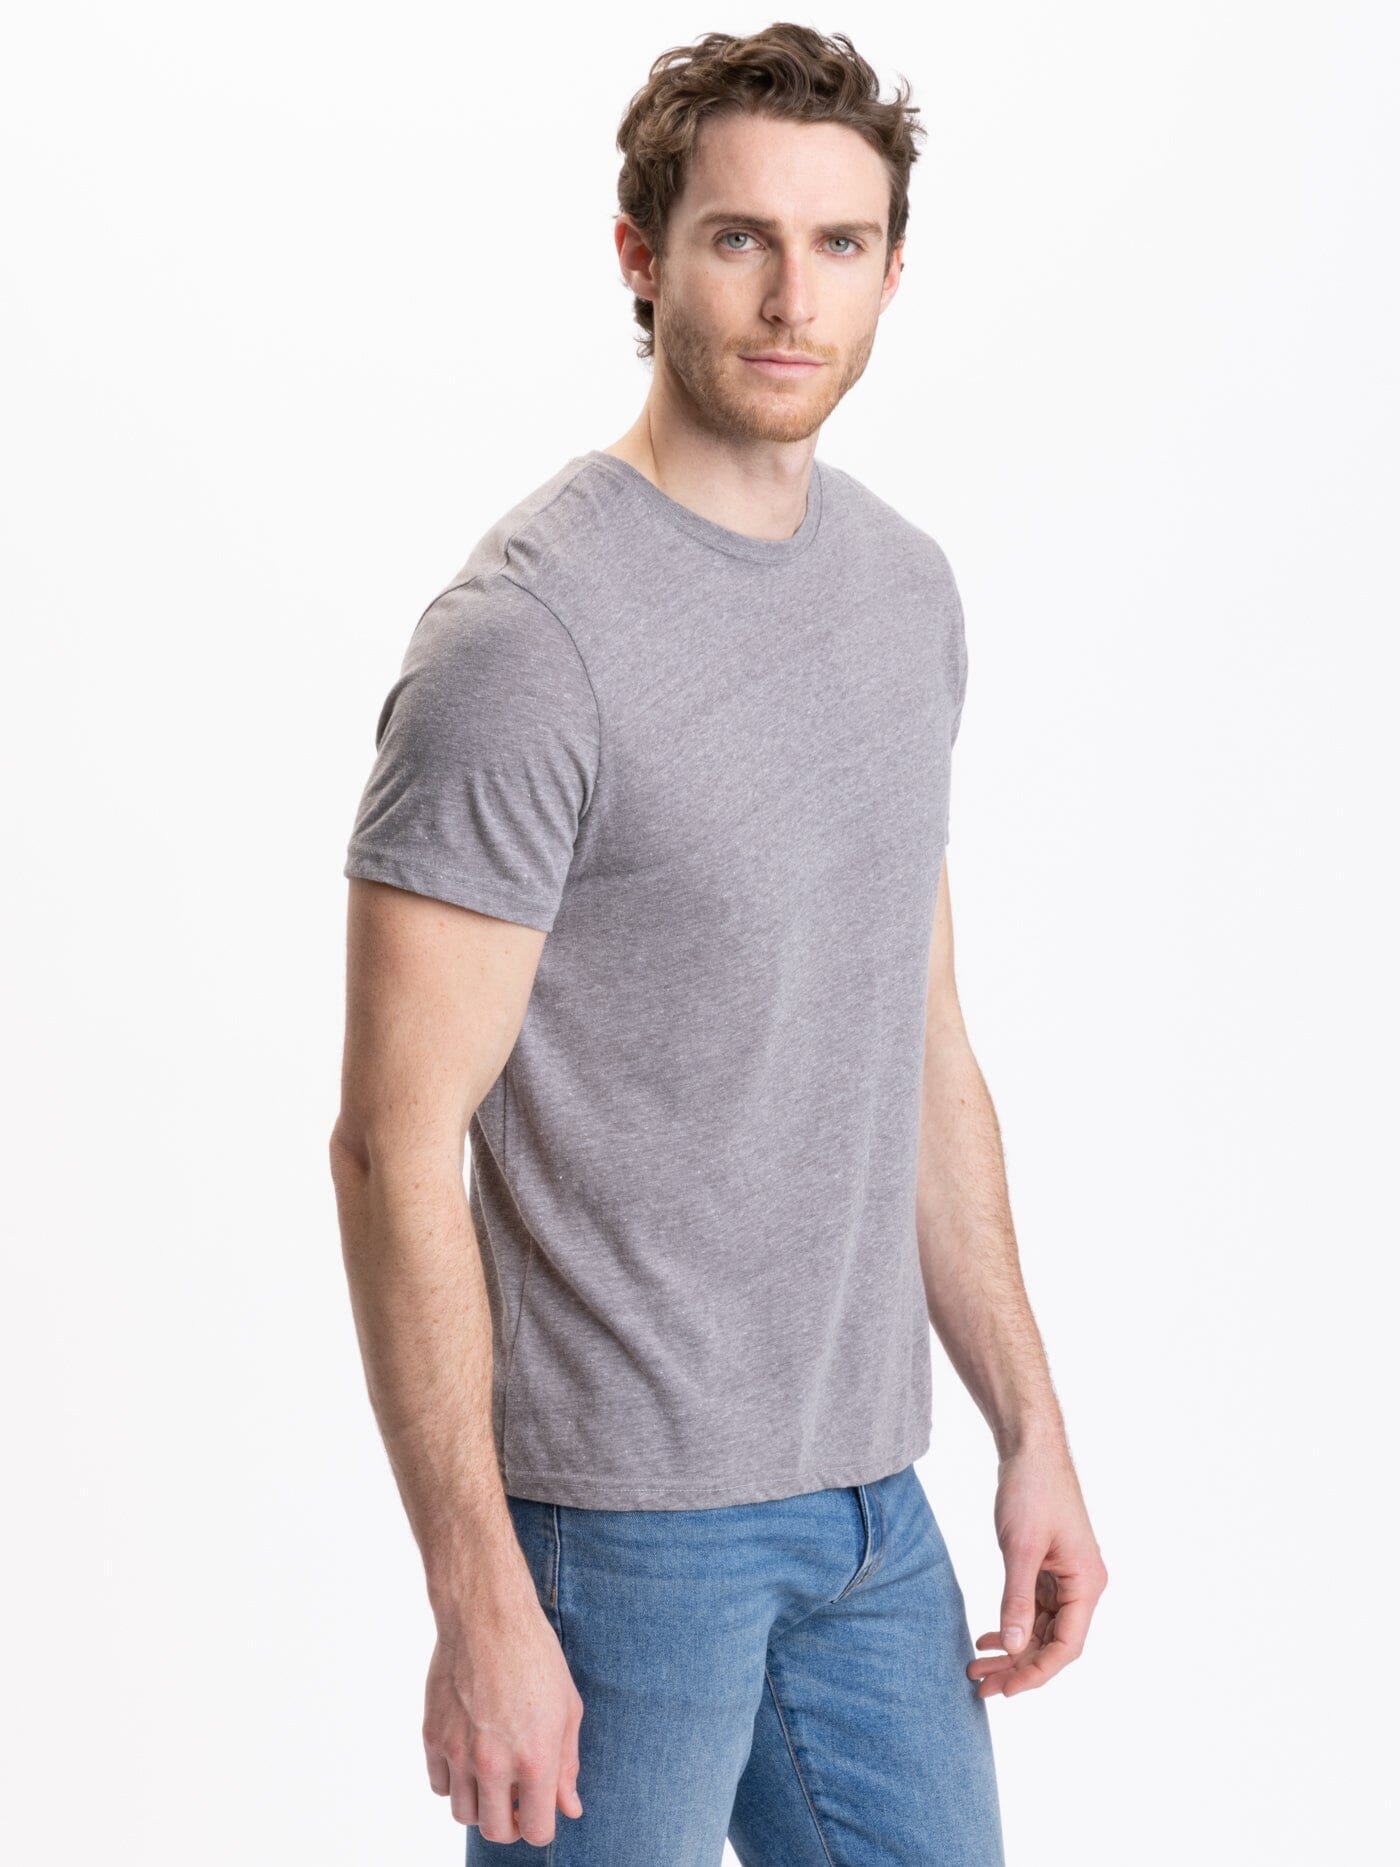 Triblend Crew Neck in 4 Thought Threads Heather Tee – Grey